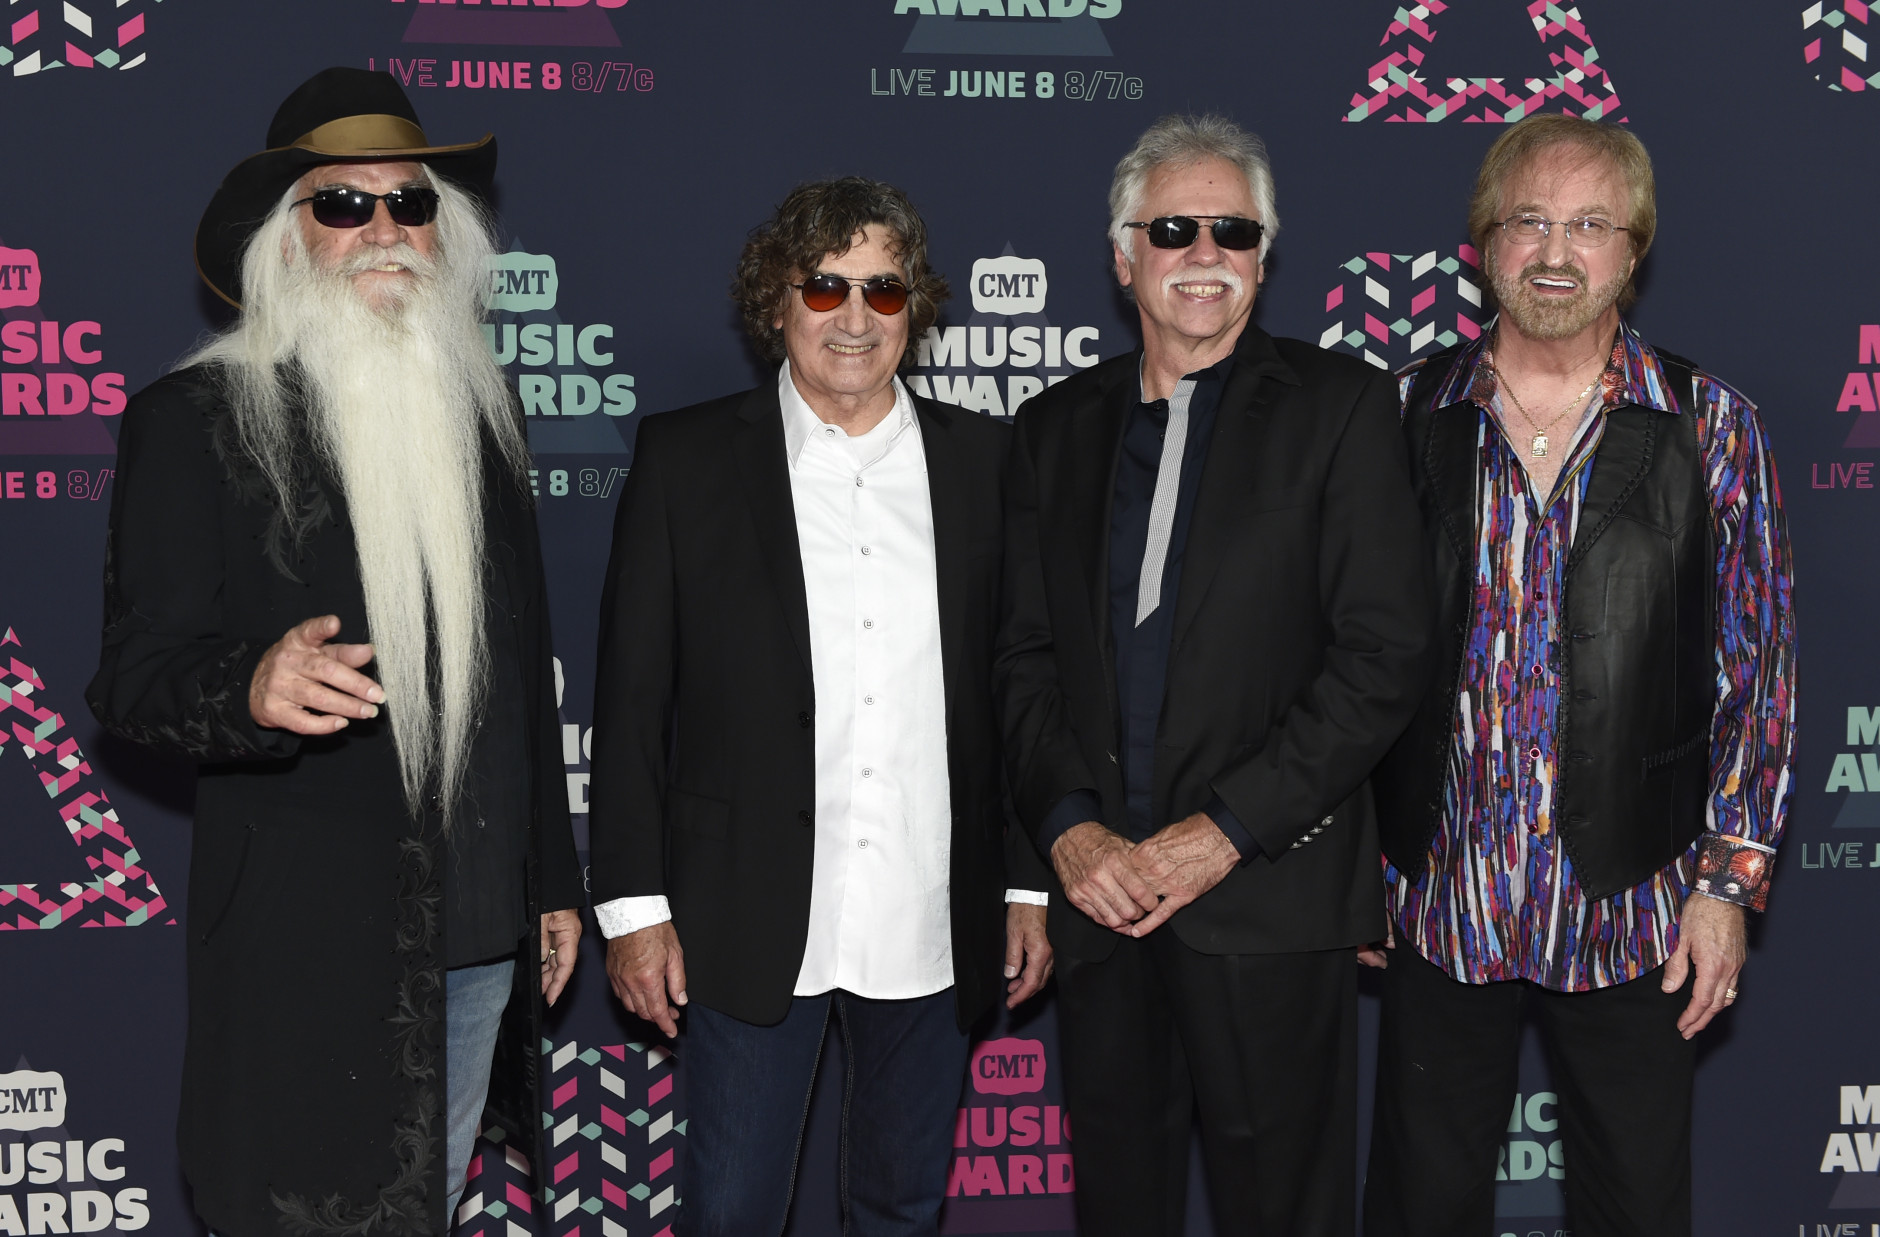 The Oak Ridge Boys, from left, William Lee Golden, Richard Sterban,  Joe Bonsall, and  Duane Allen arrive at the CMT Music Awards at the Bridgestone Arena on Wednesday, June 8, 2016, in Nashville, Tenn. (Photo by Sanford Myers/Invision/AP)